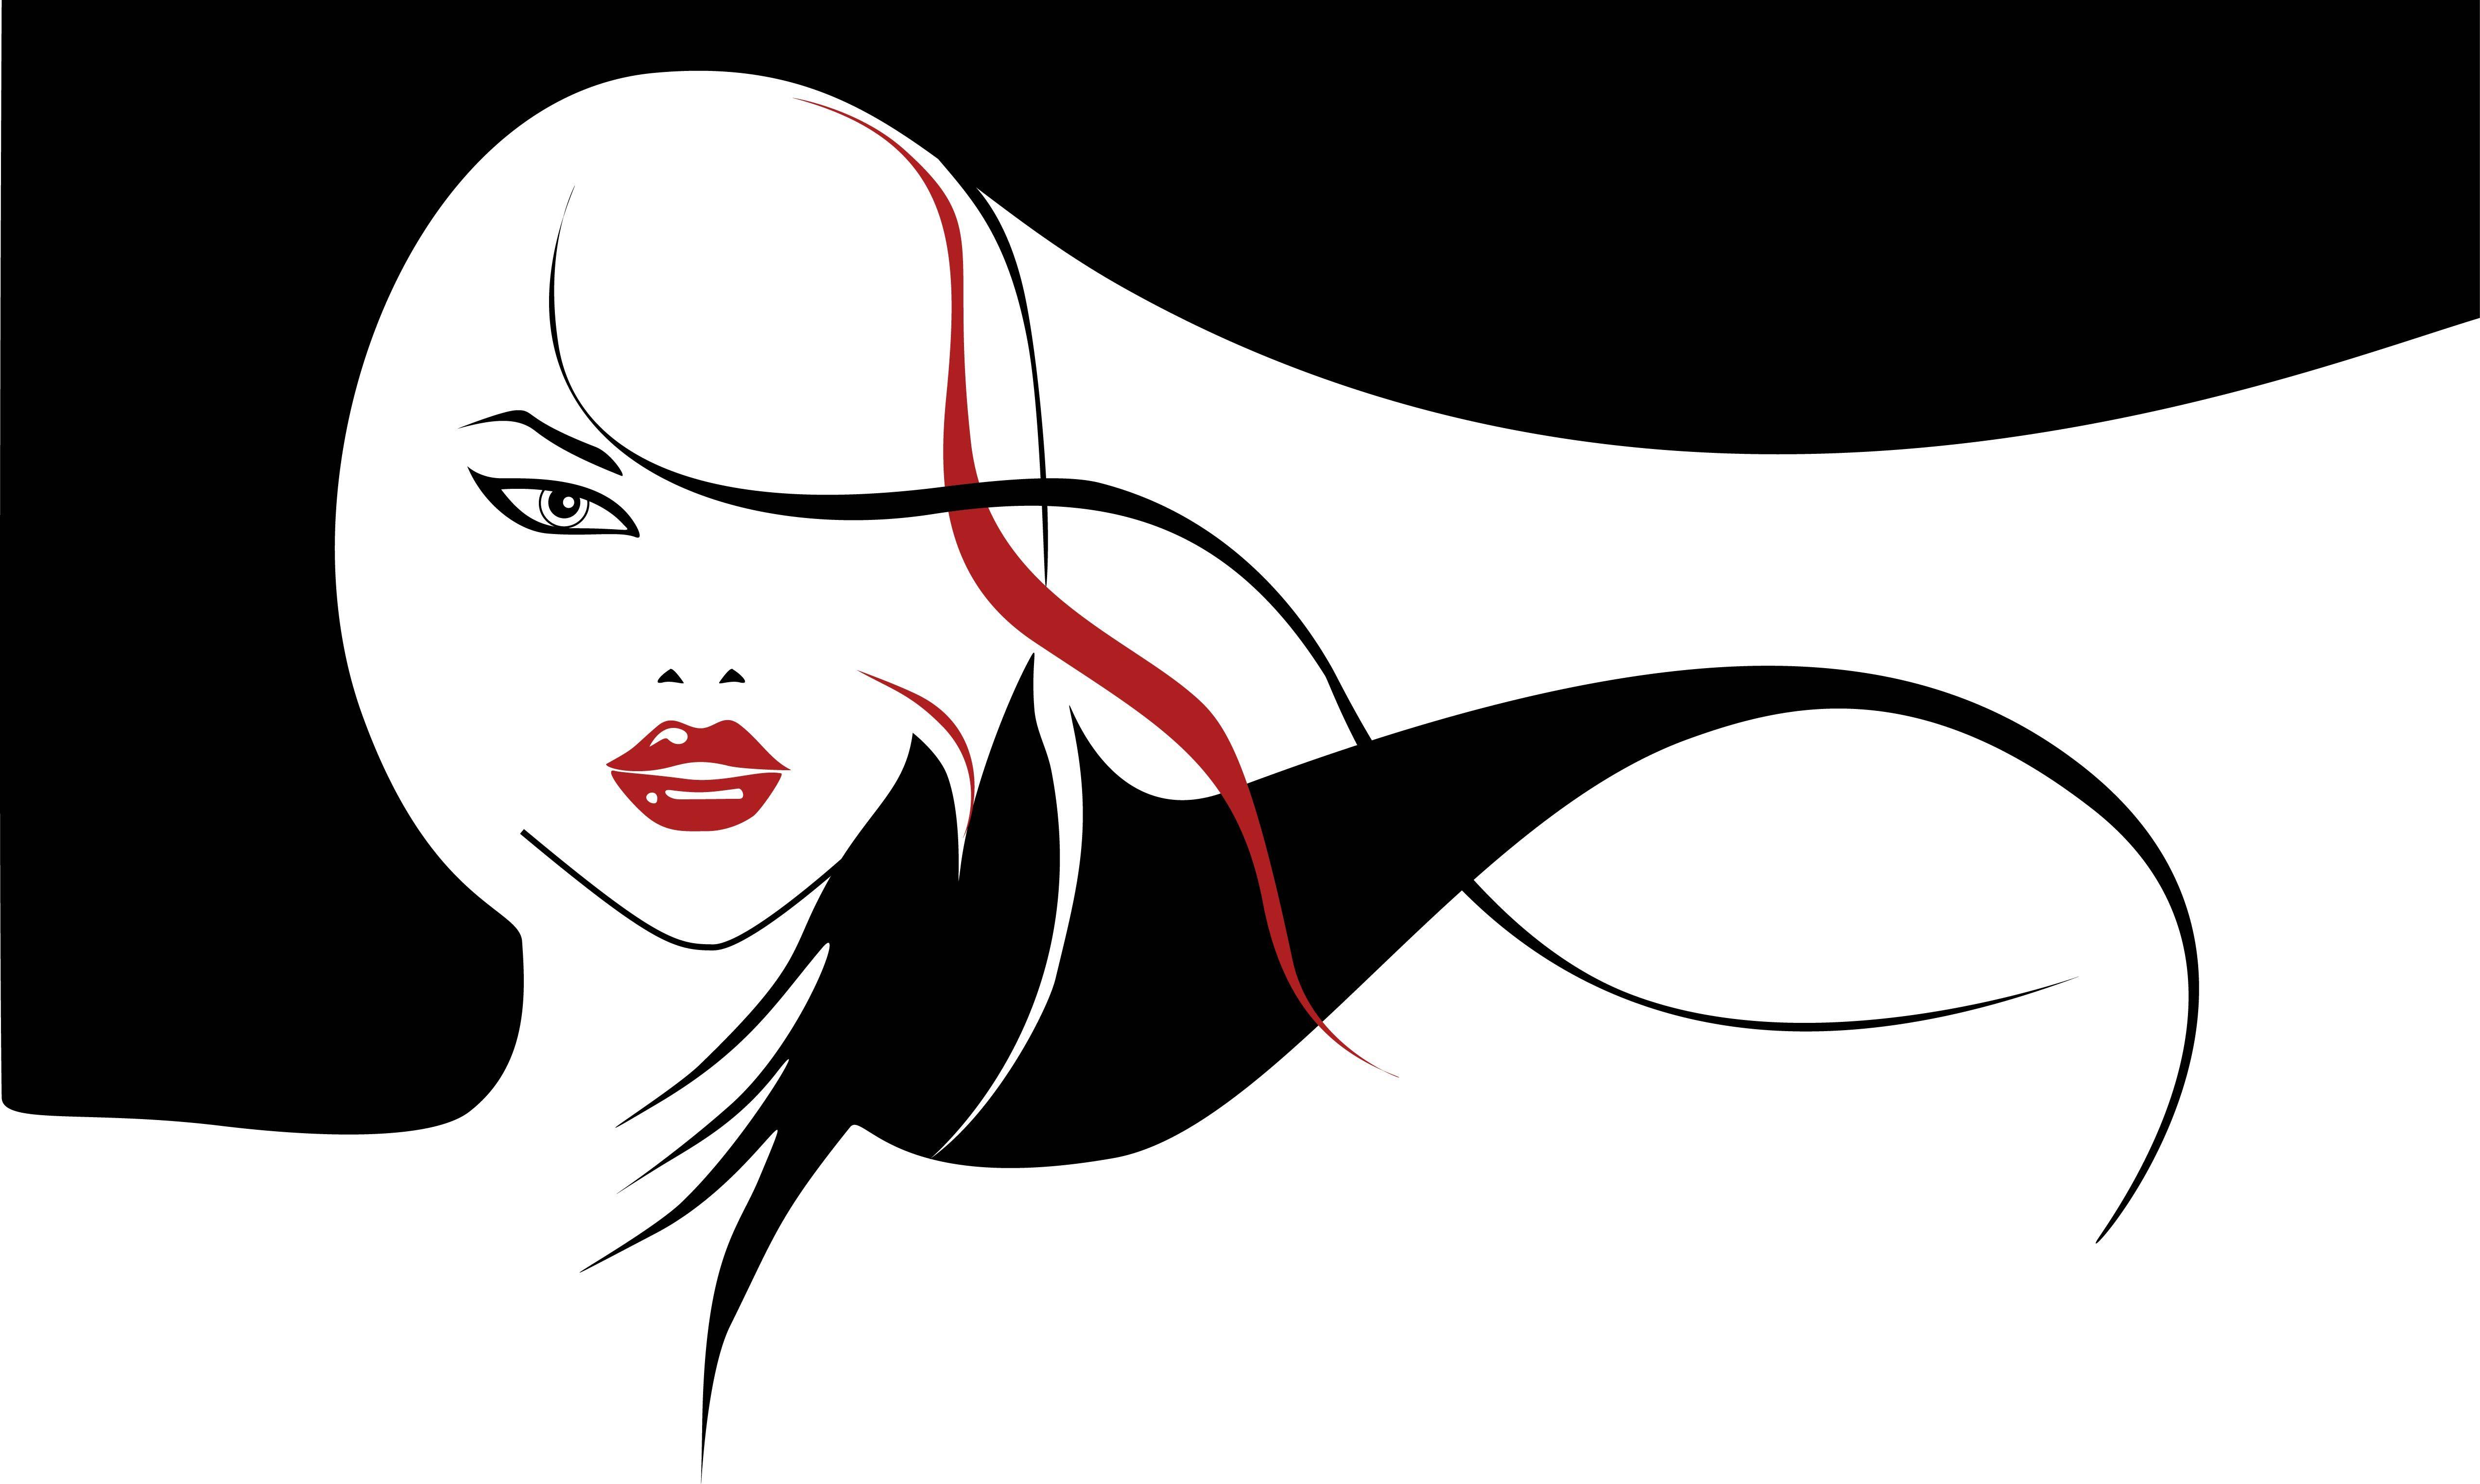 Girl with Flowing Hair Logo - Black and white girl by LuisxOlavarria on DeviantArt